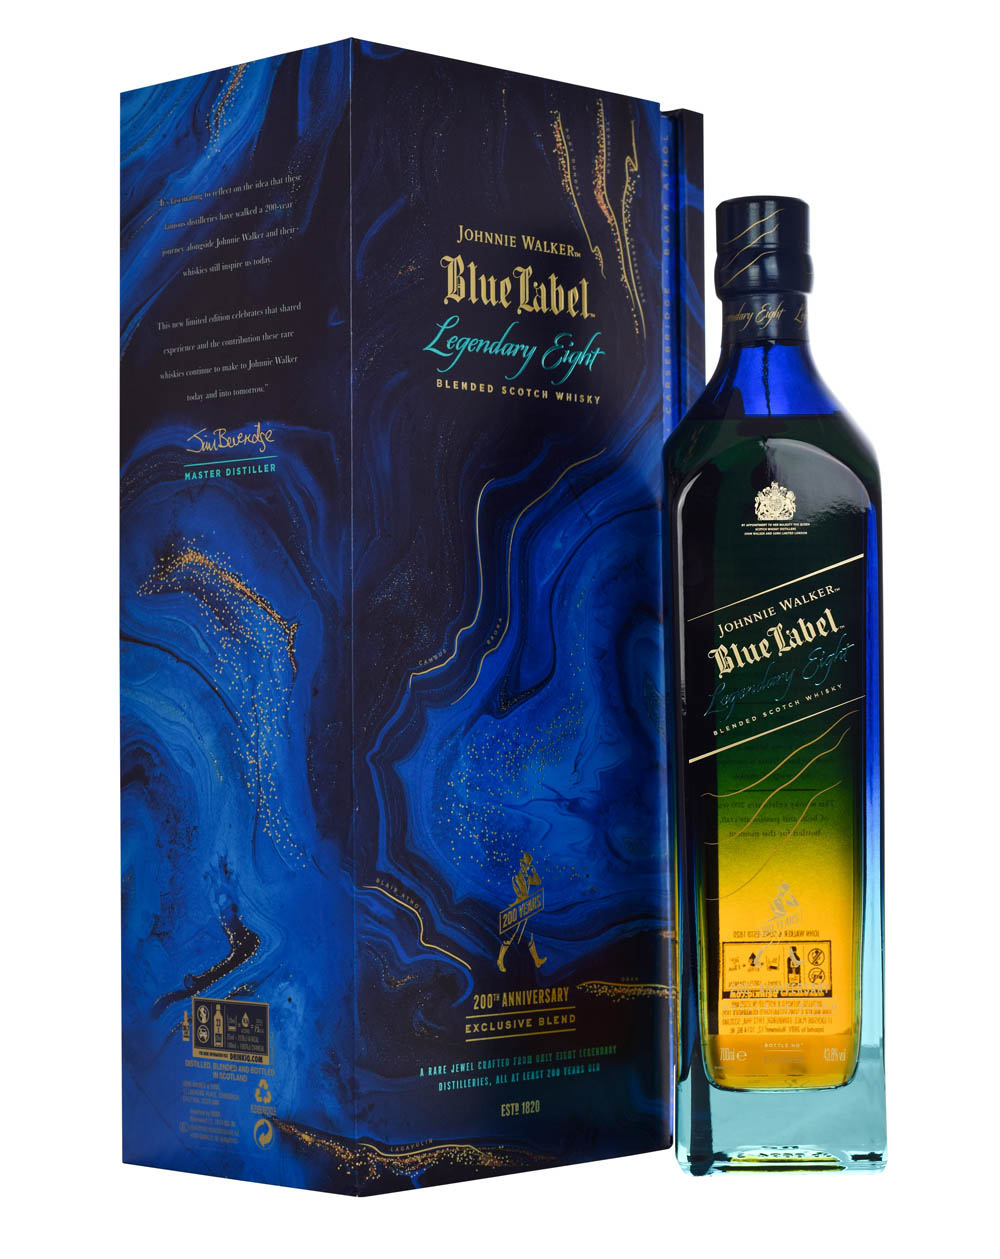 Johnnie Walker Blue Label 200th Anniversary Legendary Eight Box 2 Musthave Malts MHM